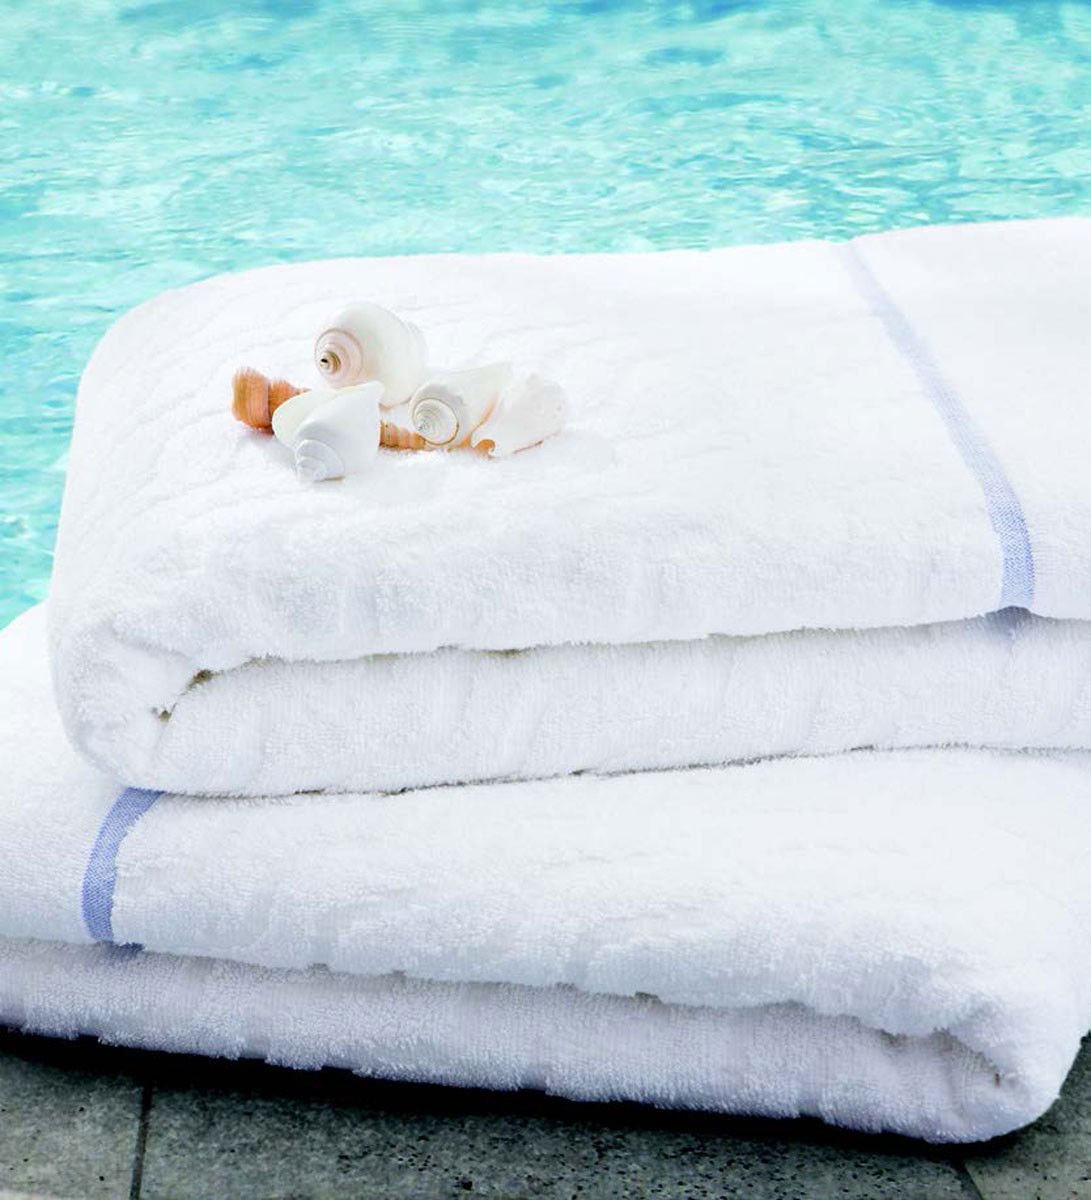 How does EuroSpa towels benefit from Room Ready For You® laundering with Tide®?